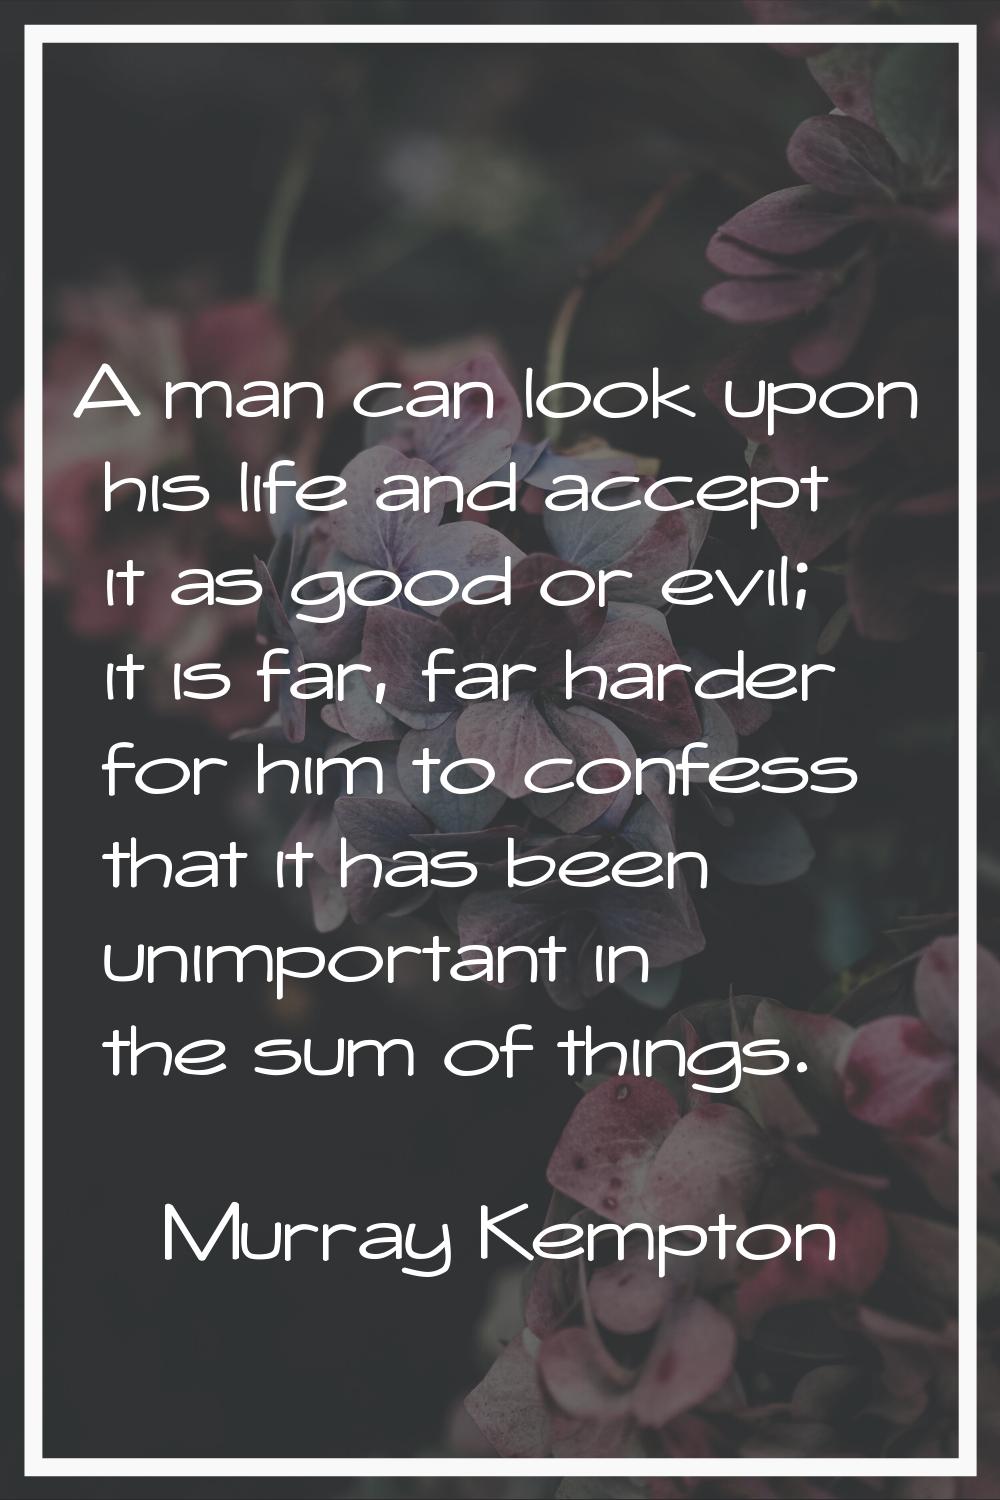 A man can look upon his life and accept it as good or evil; it is far, far harder for him to confes